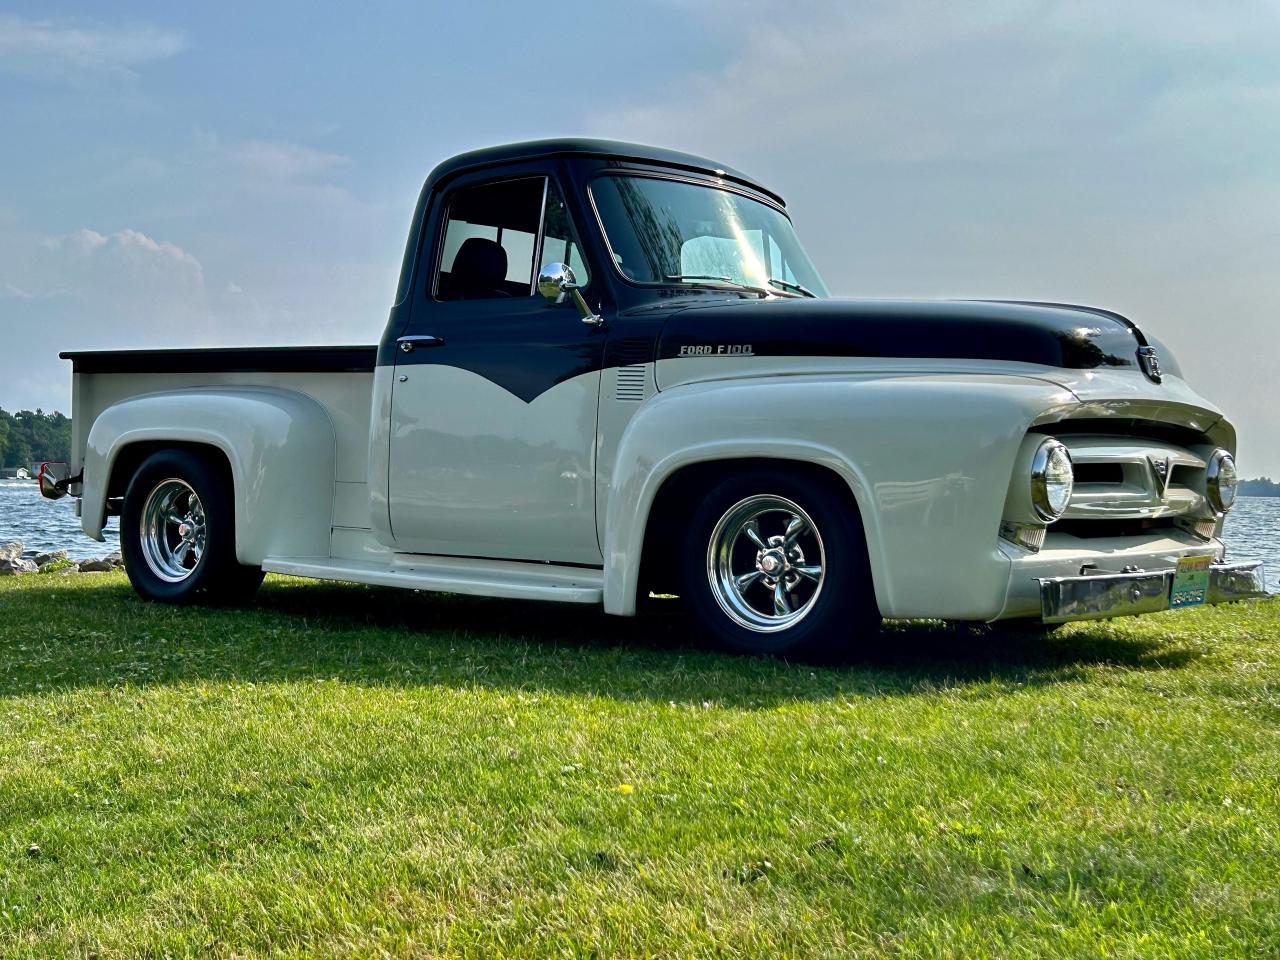 1953 Ford F100 truck - Photo #8